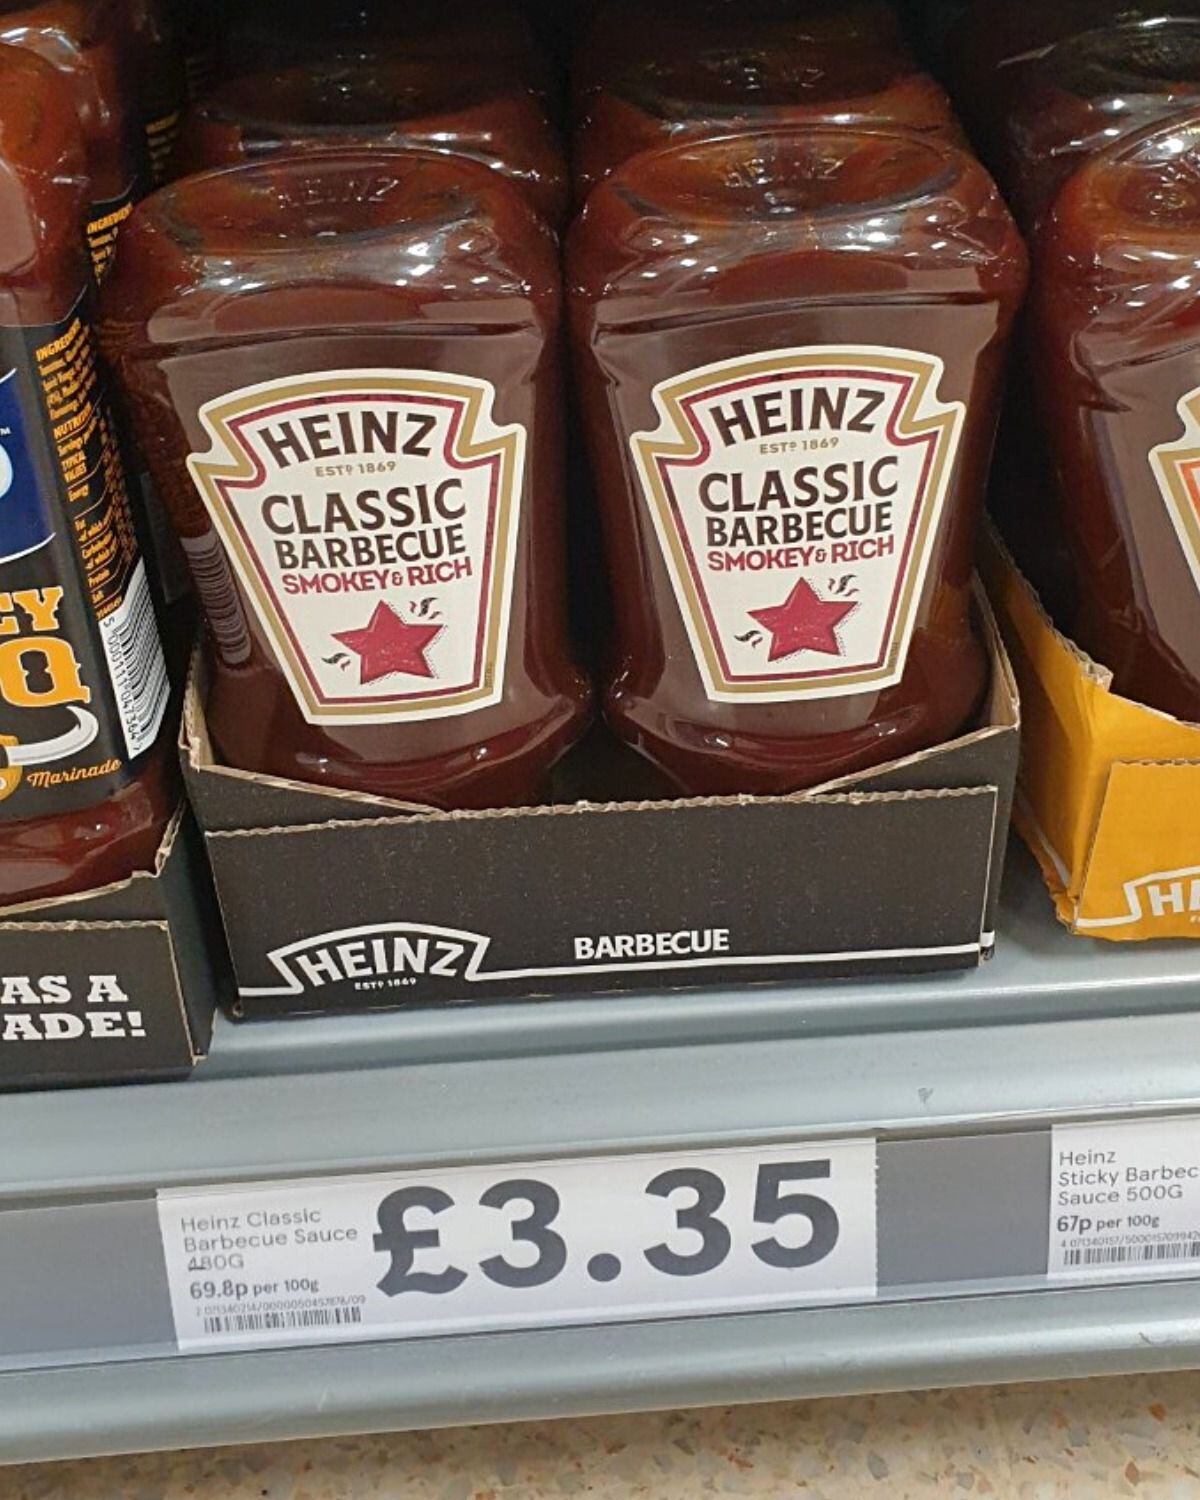 Heinz 'Classic Barbecue' sauce costs £3.35 in Tesco, when the same amount cost £2.13 last year. 